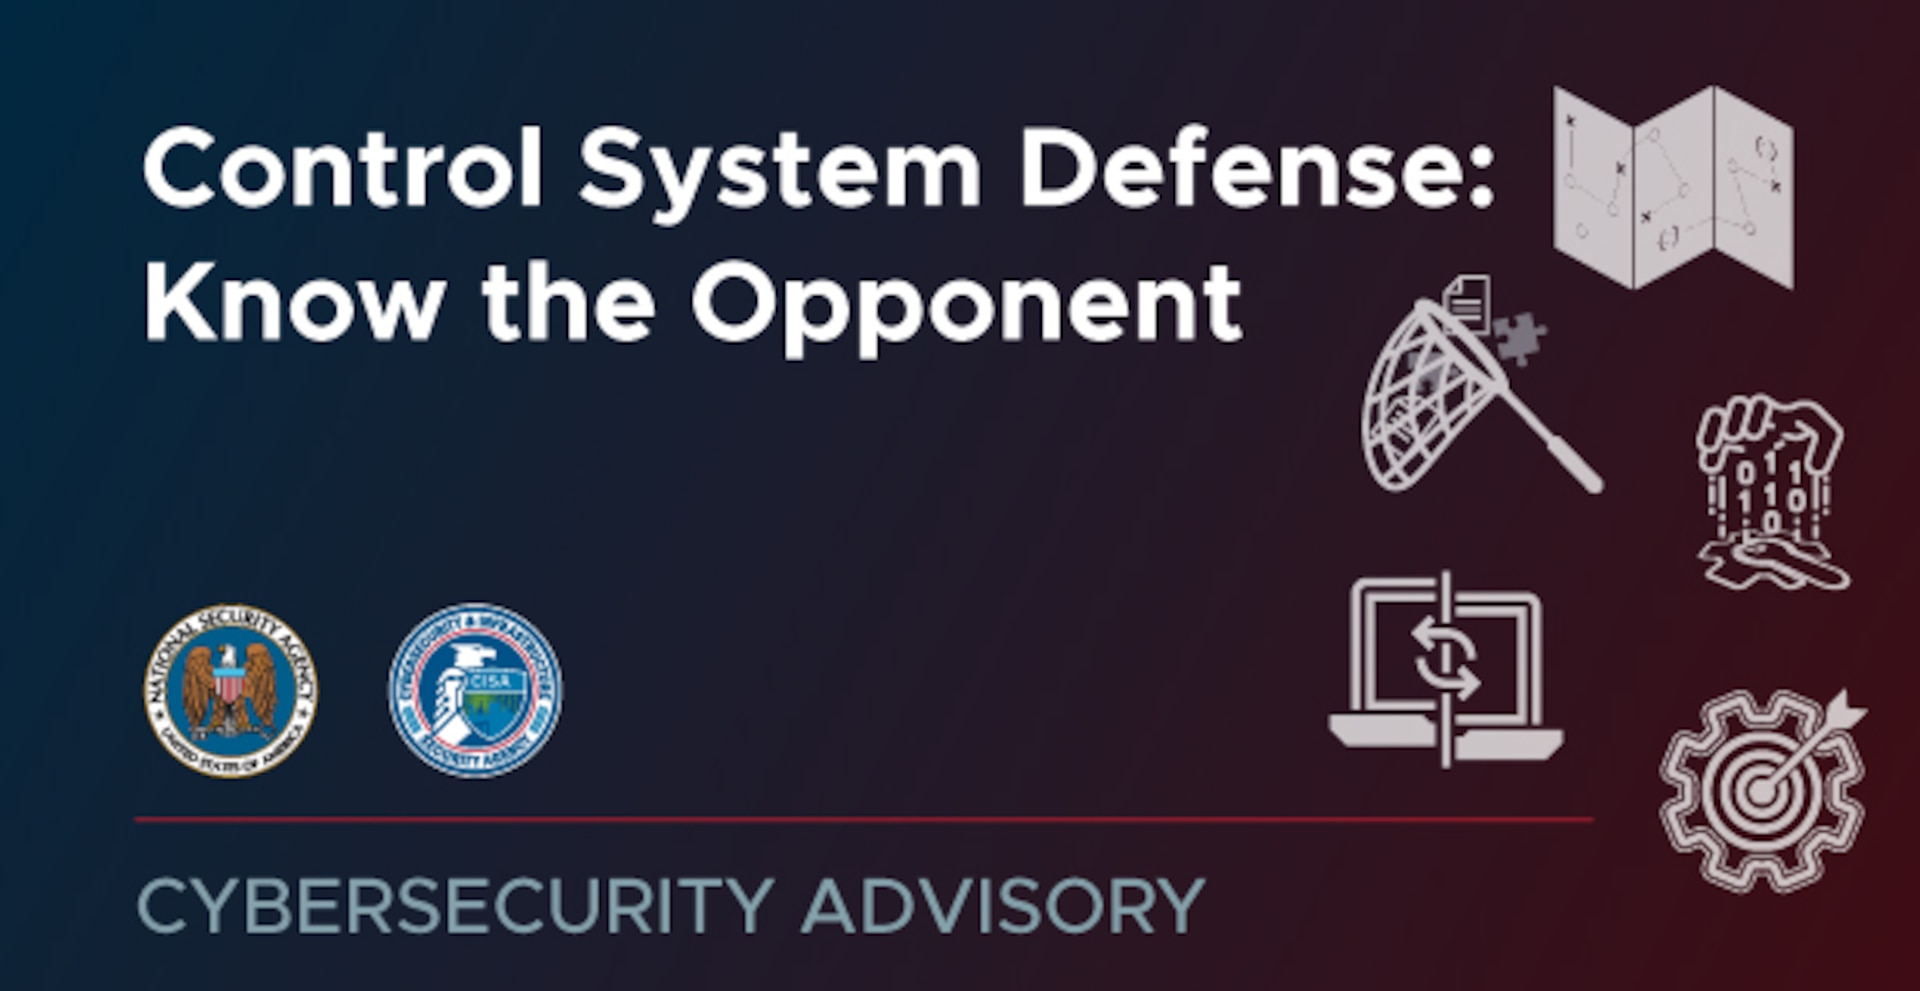 CSA: Control System Defense: Know the Opponent